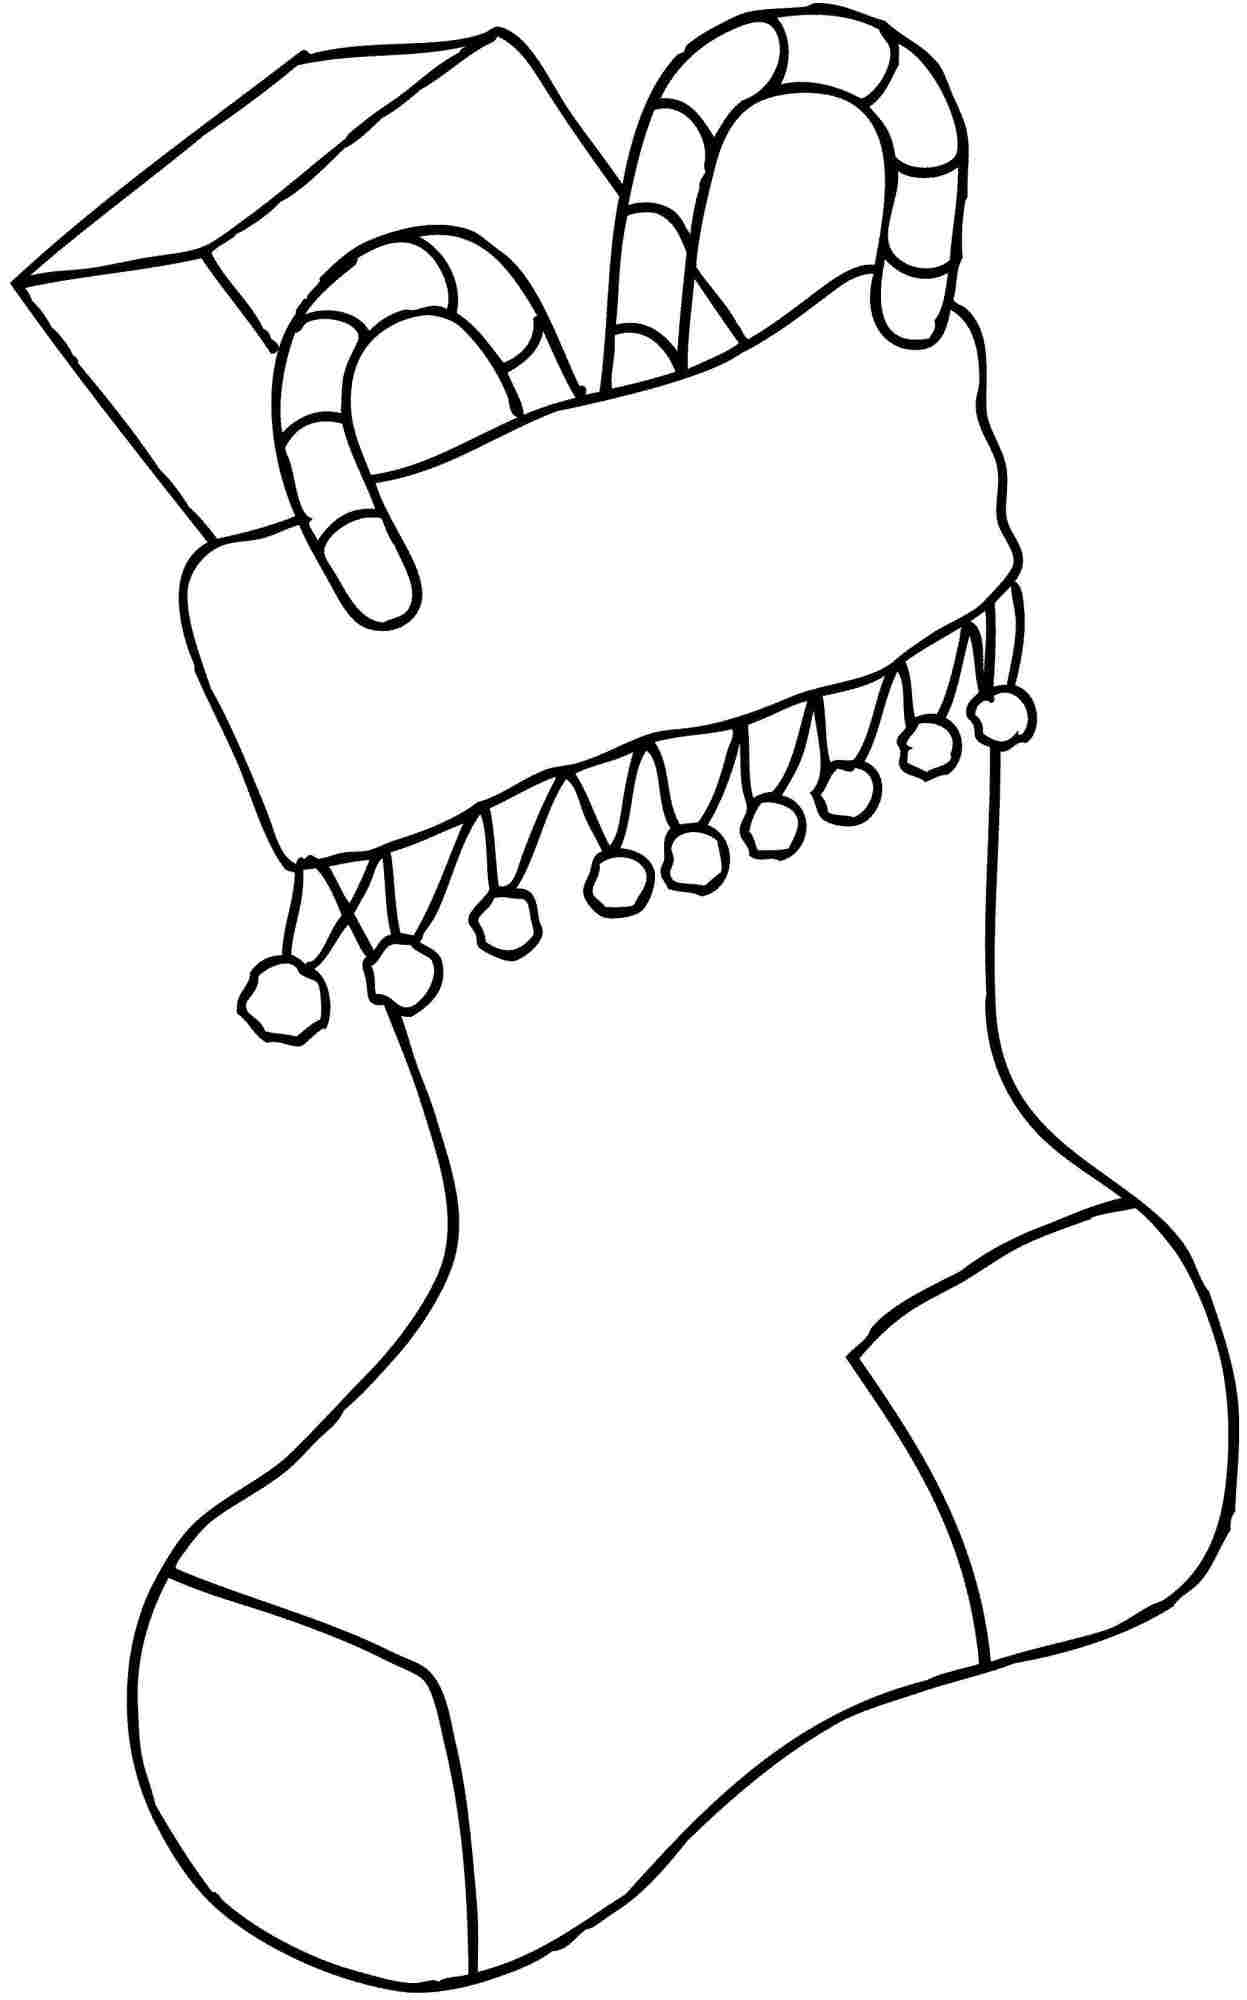 Plain Christmas Stocking Coloring Pages at GetColorings.com | Free